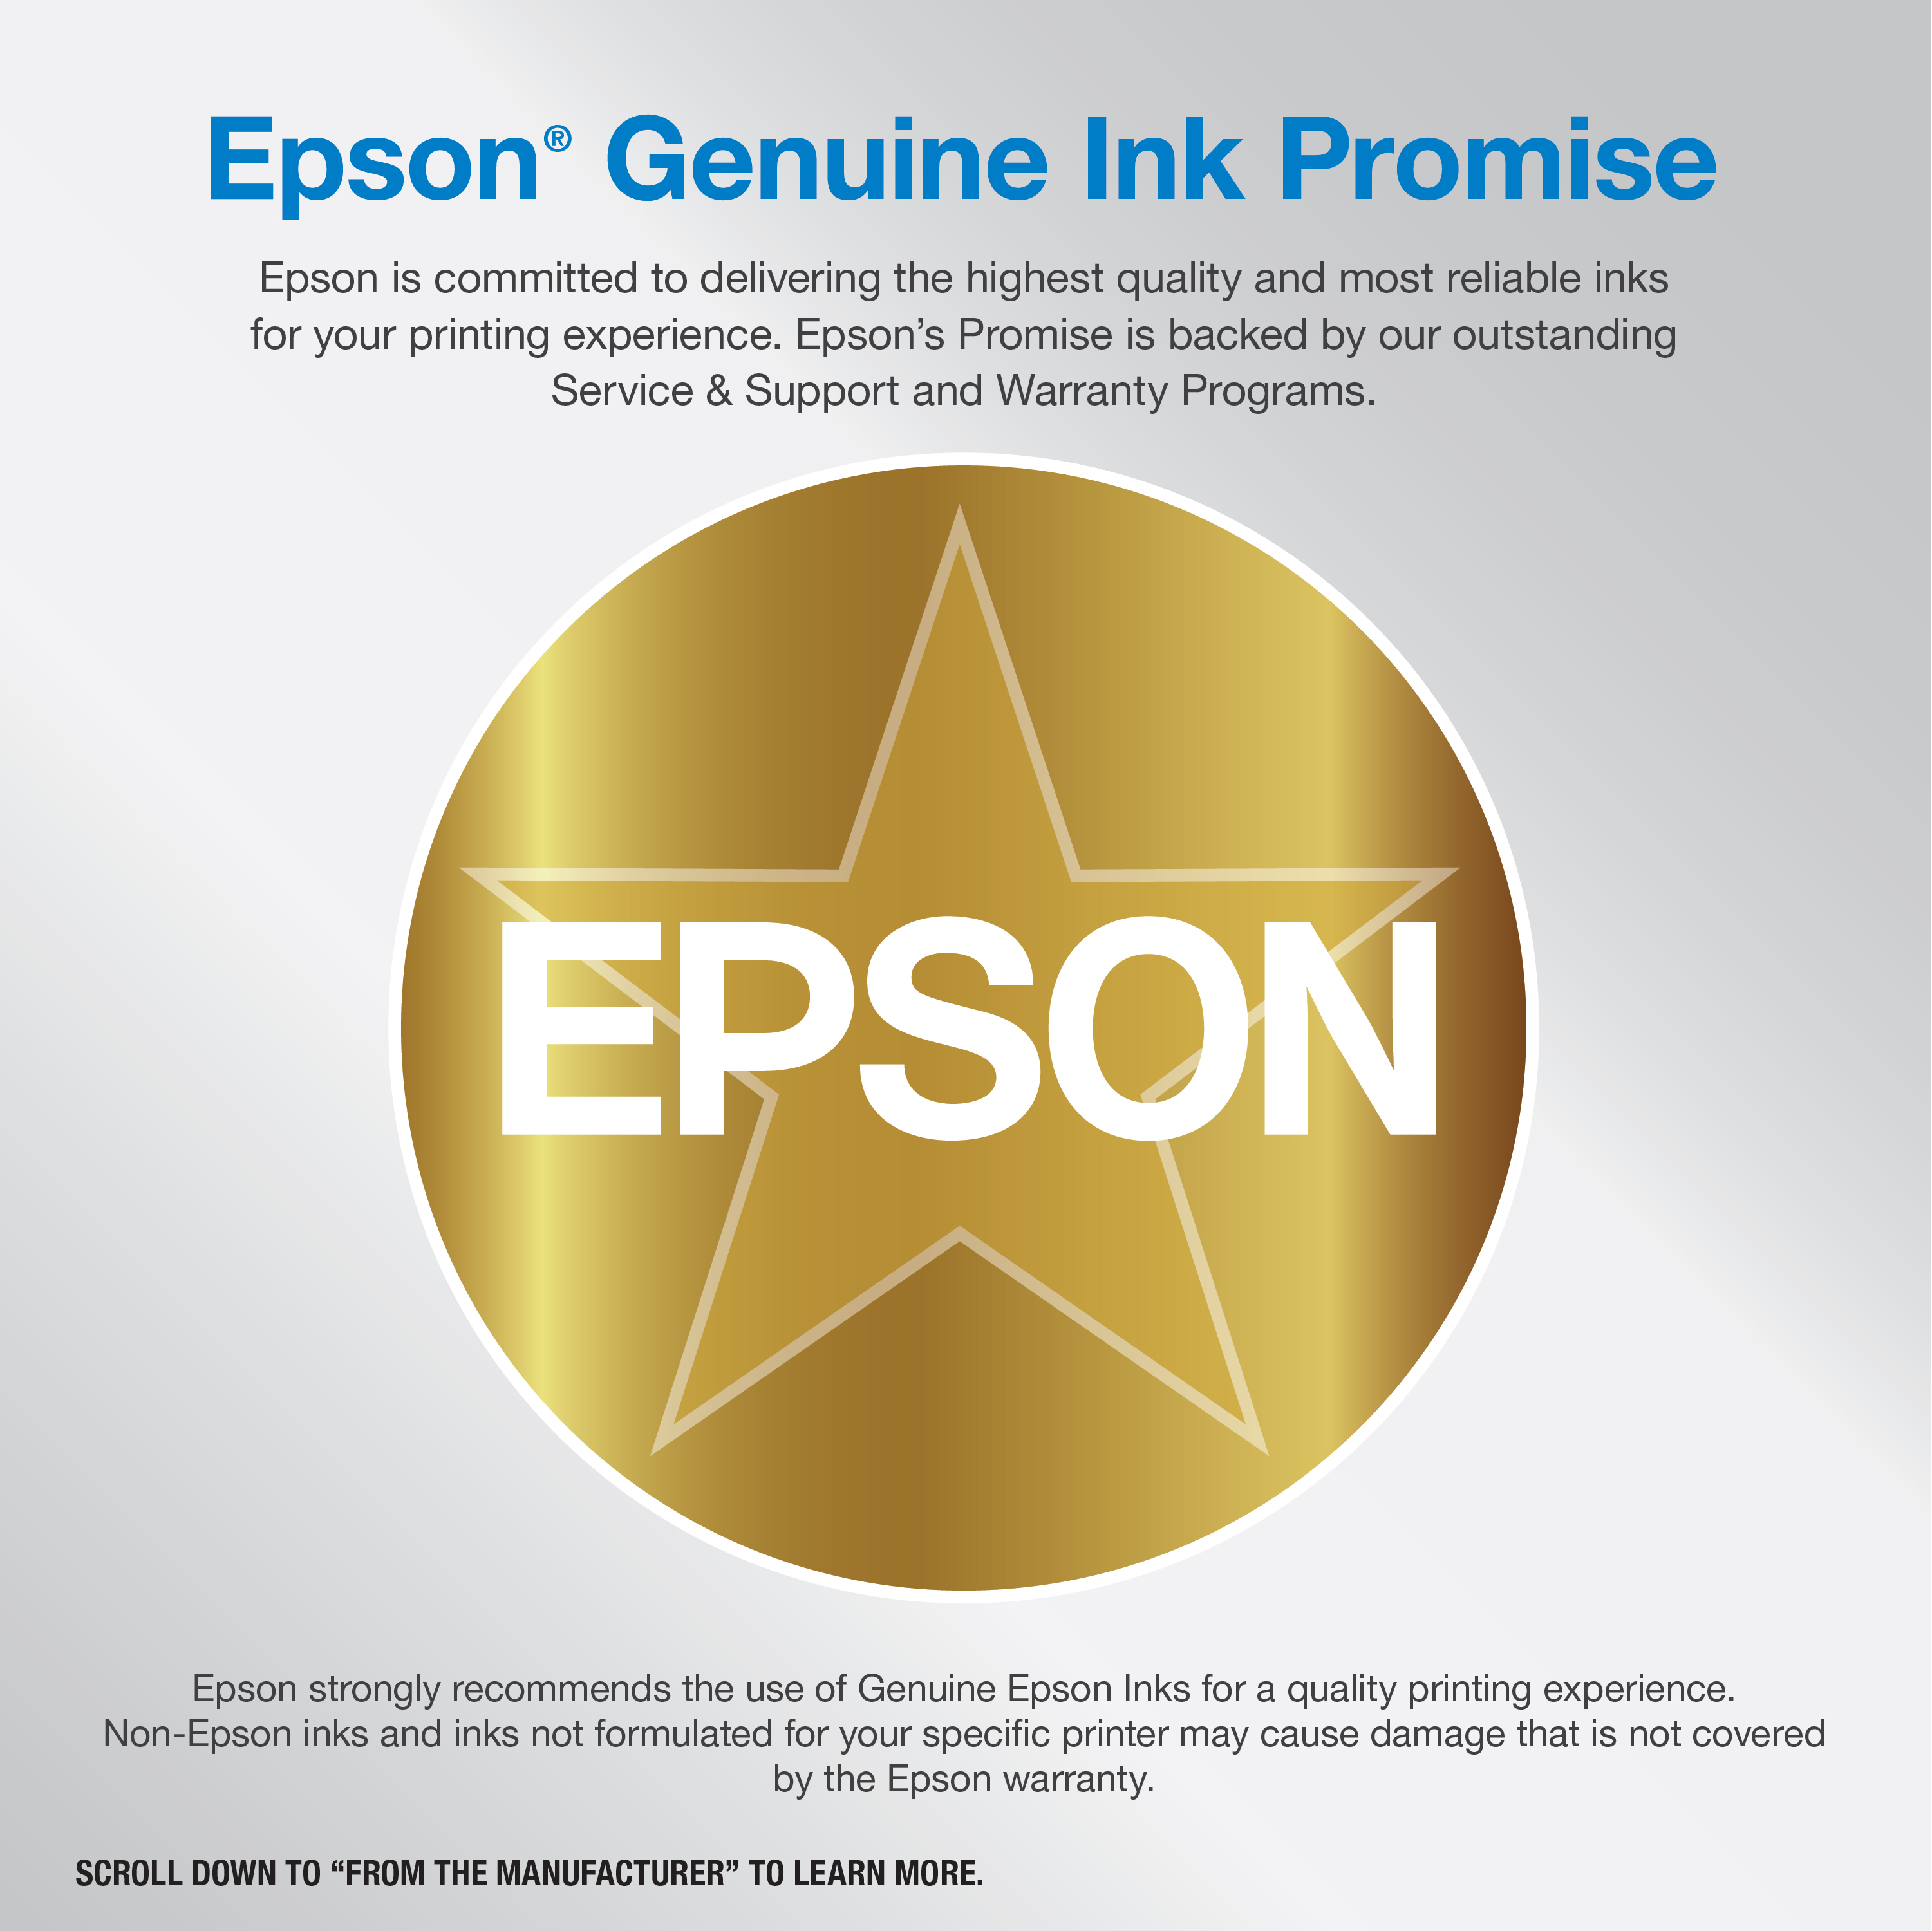 Epson EcoTank ET-15000 Wireless Color All-in-One Supertank Printer with Scanner, Copier, Fax, Ethernet and Printing up to 13 x 19 Inches - image 2 of 6